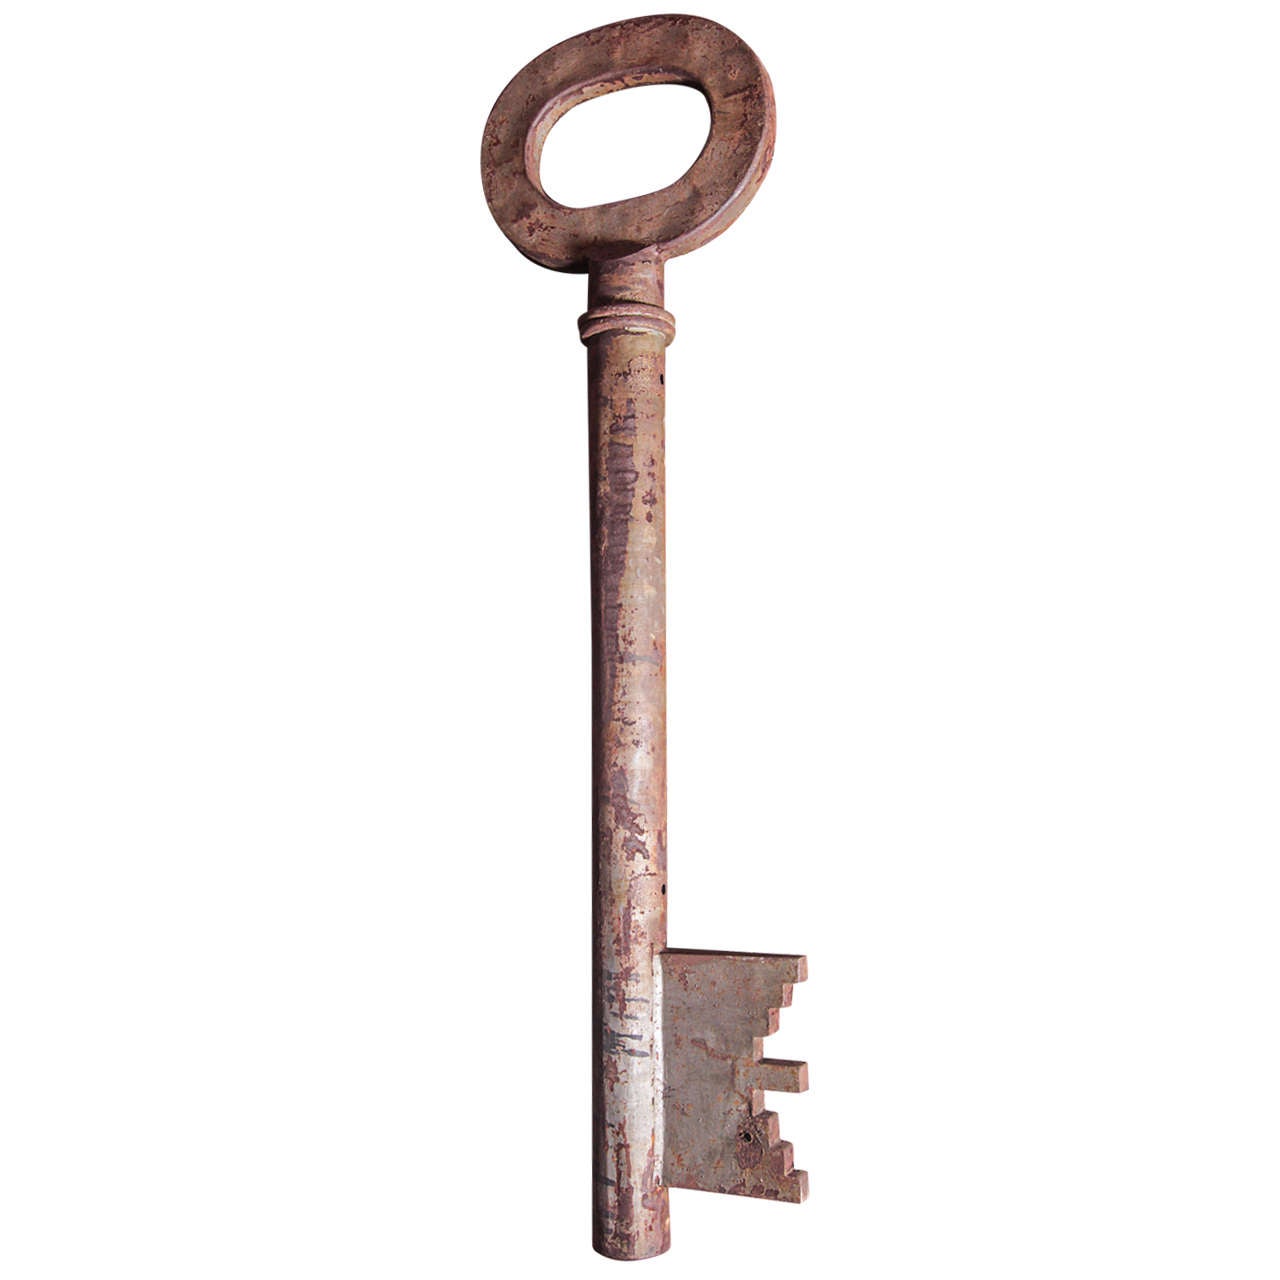 Immense American Metal Trade Sign of a Key